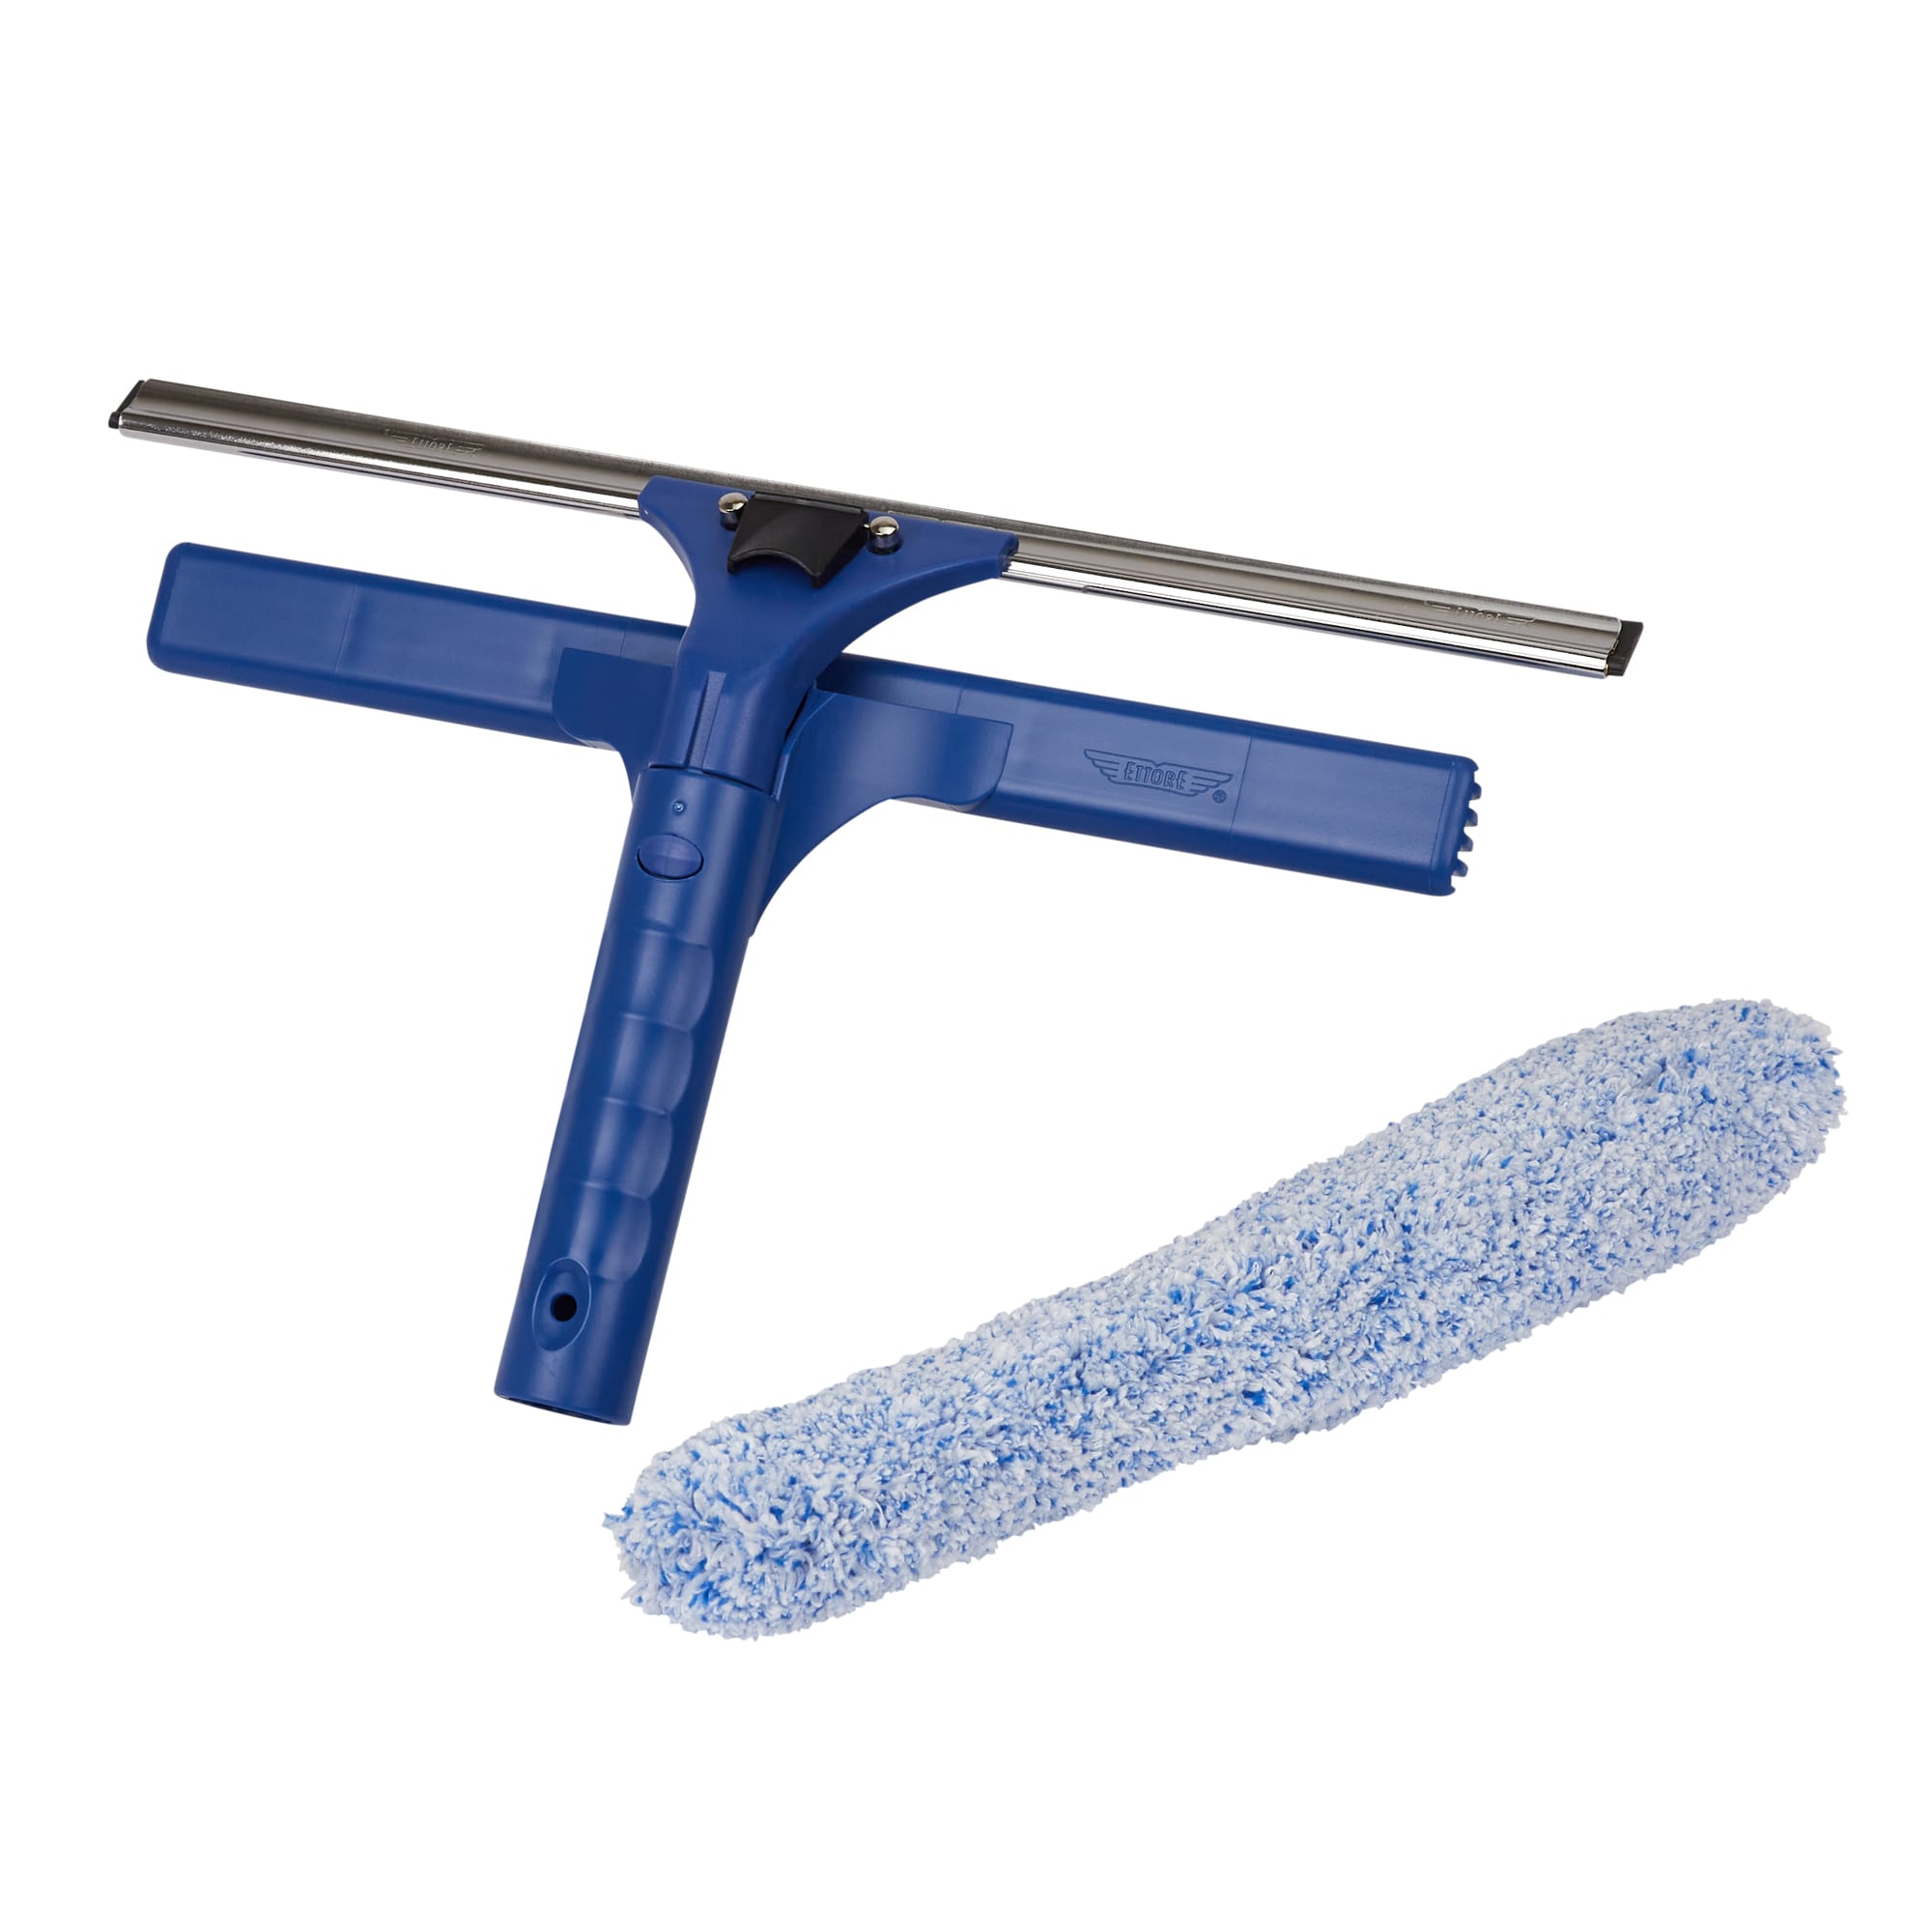 Ettore ProGrip Window Squeegee, 18 inch - Blue, High-Performance, Ergonomic  Cushion Grip, Stainless Steel Handle - Perfect for Windows in the Squeegees  department at